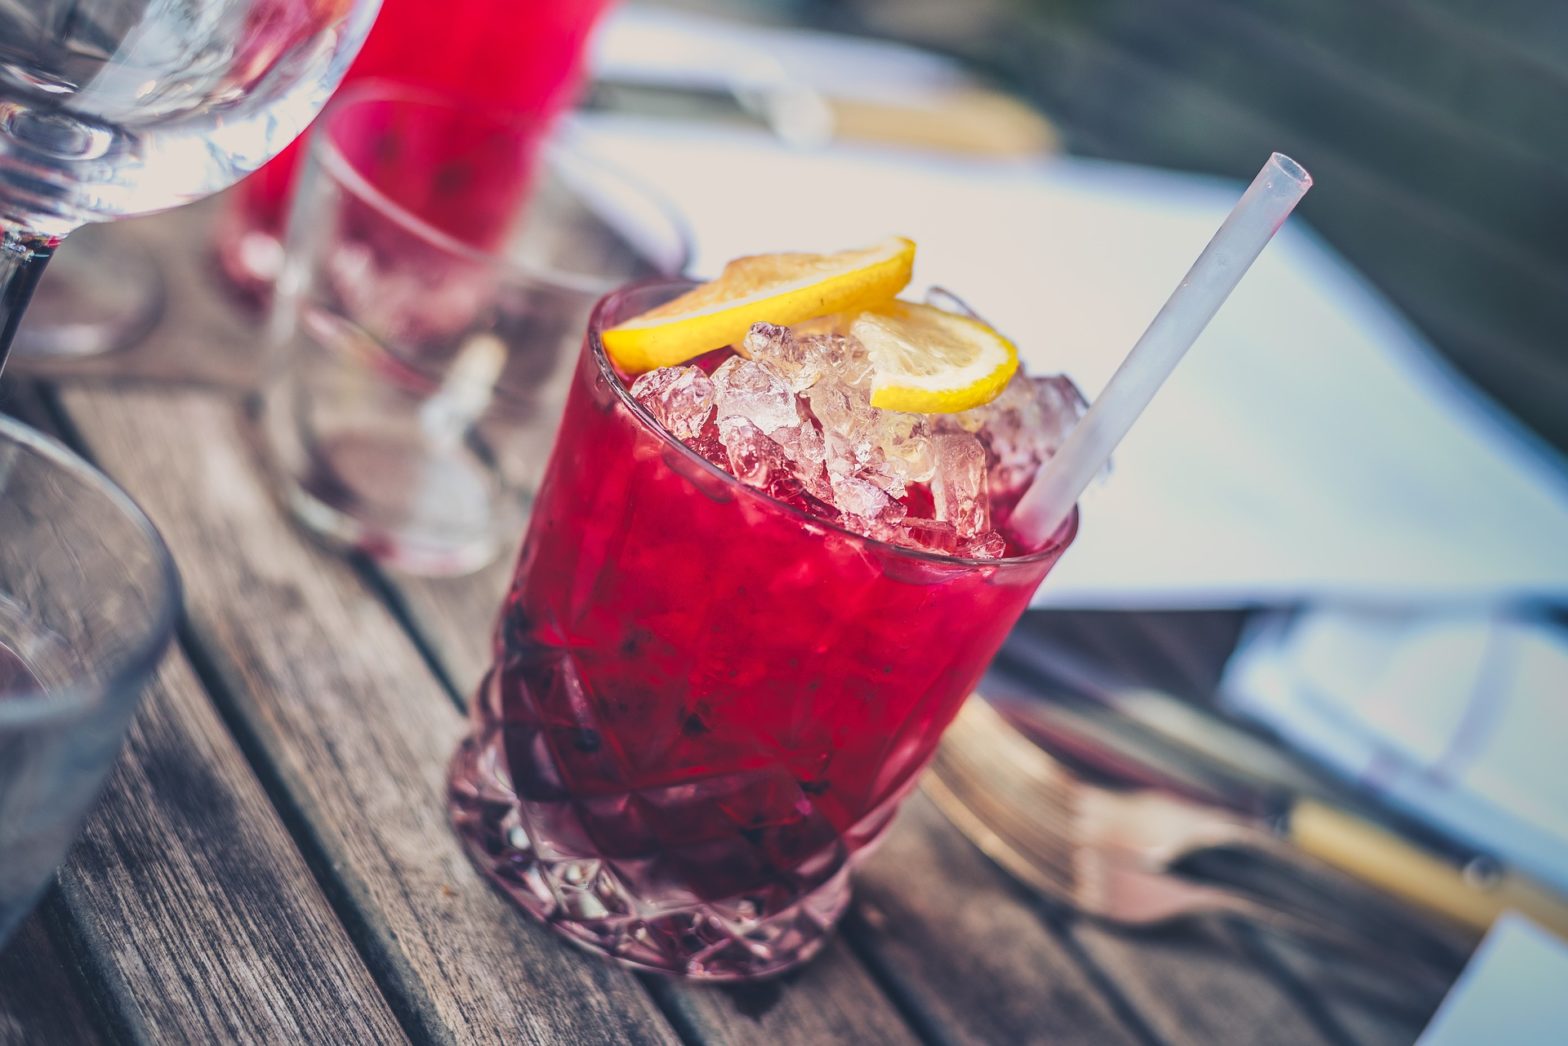 image of red alcoholic drink